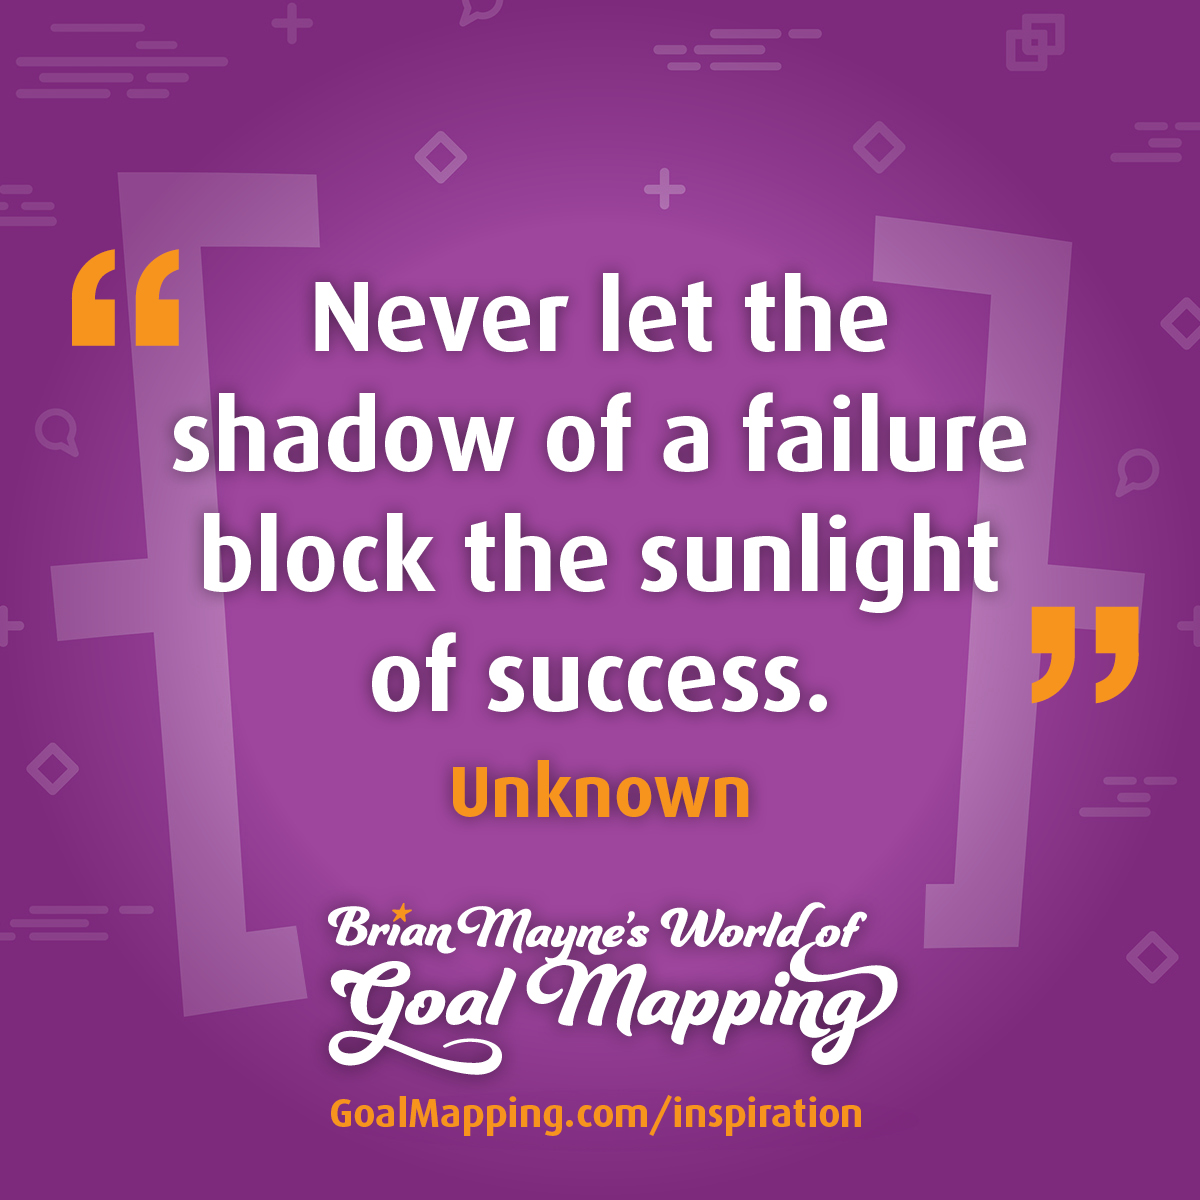 "Never let the shadow of a failure block the sunlight of success." Unknown